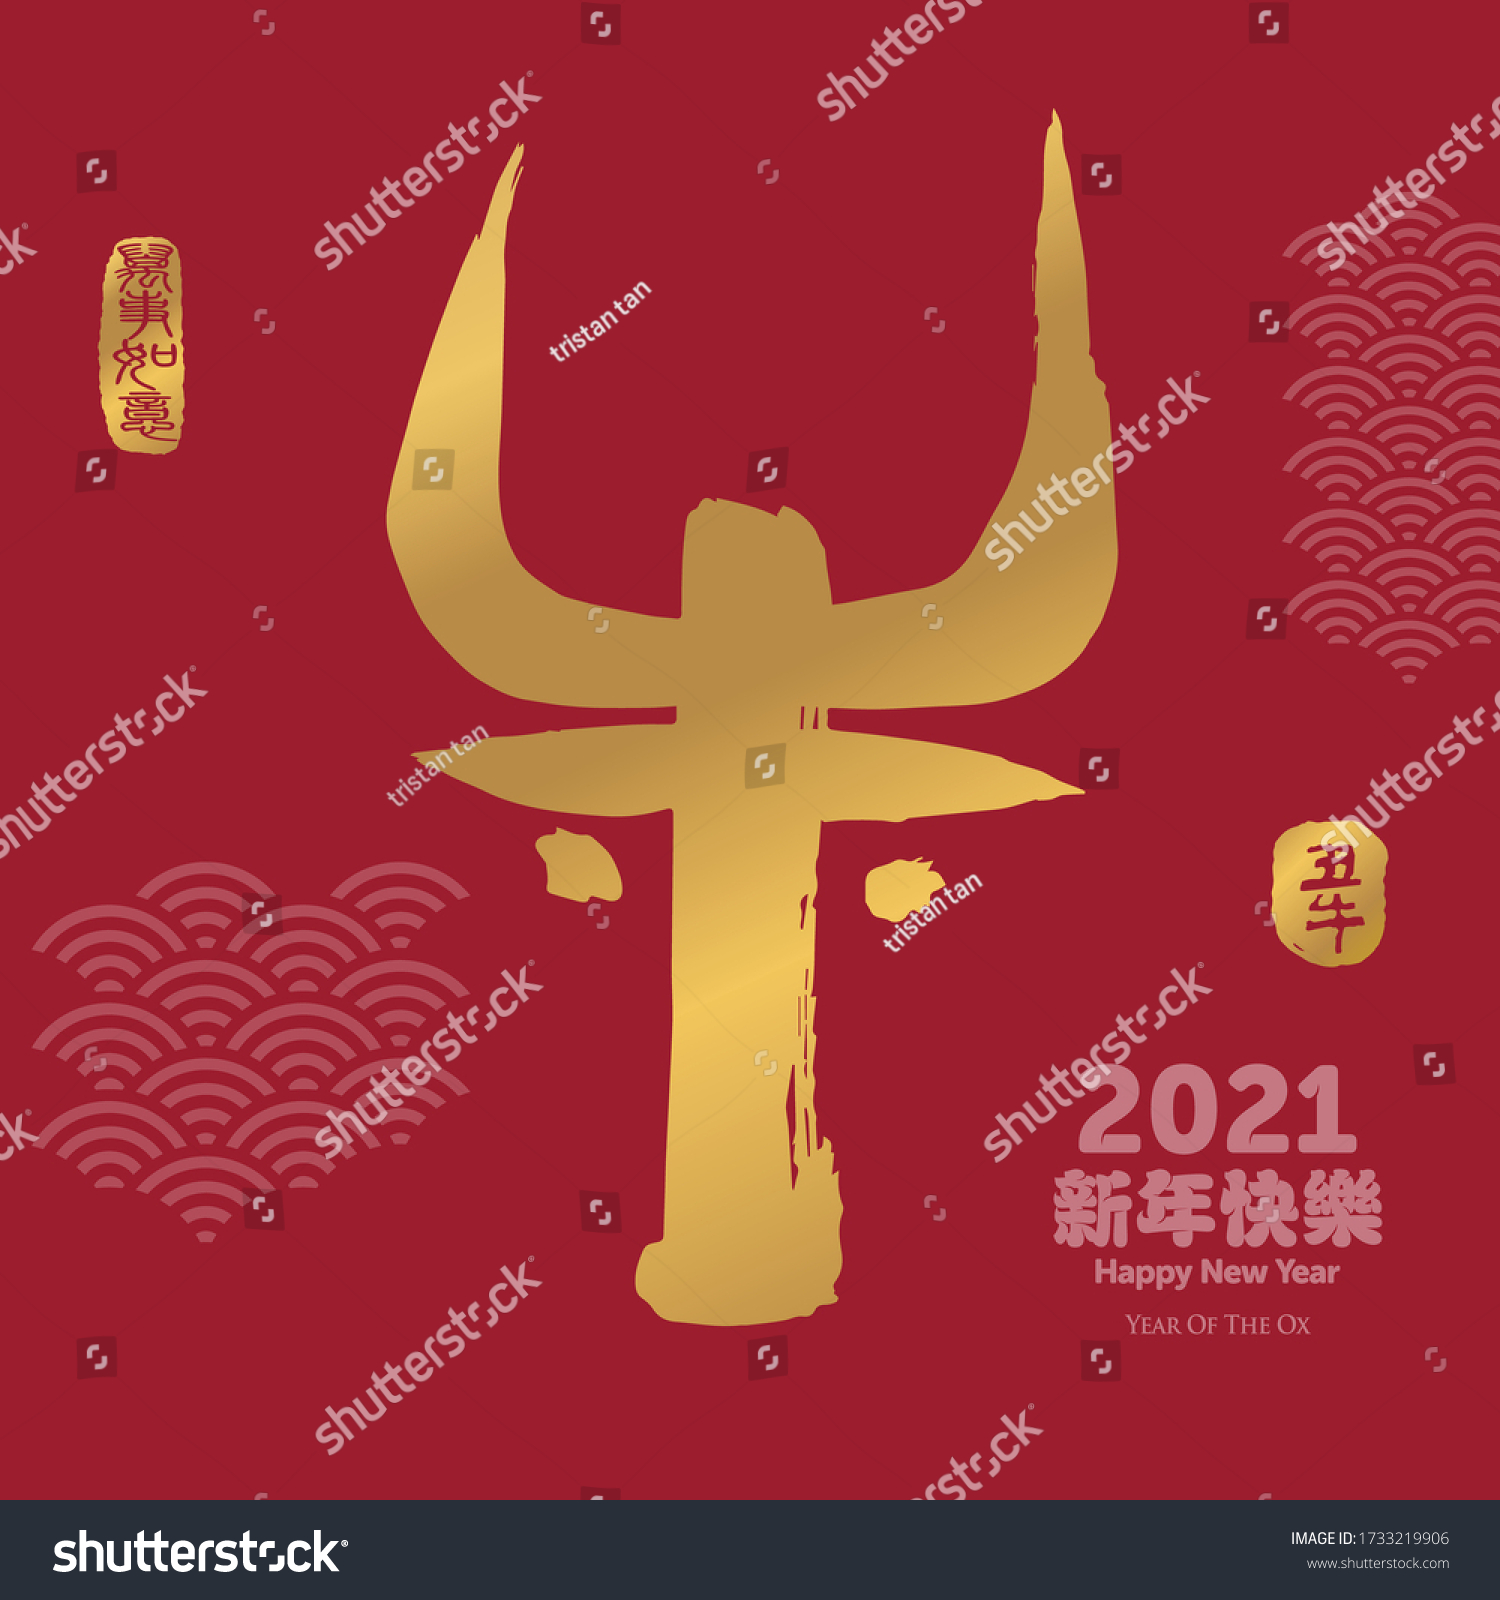 Vector illustration of Ox Chinese character. Chinese calligraphy translation: Happy New Year. Year of the Ox. Leftside seal translation: Everything is going smoothly. Rightside seal translation: Ox. #1733219906